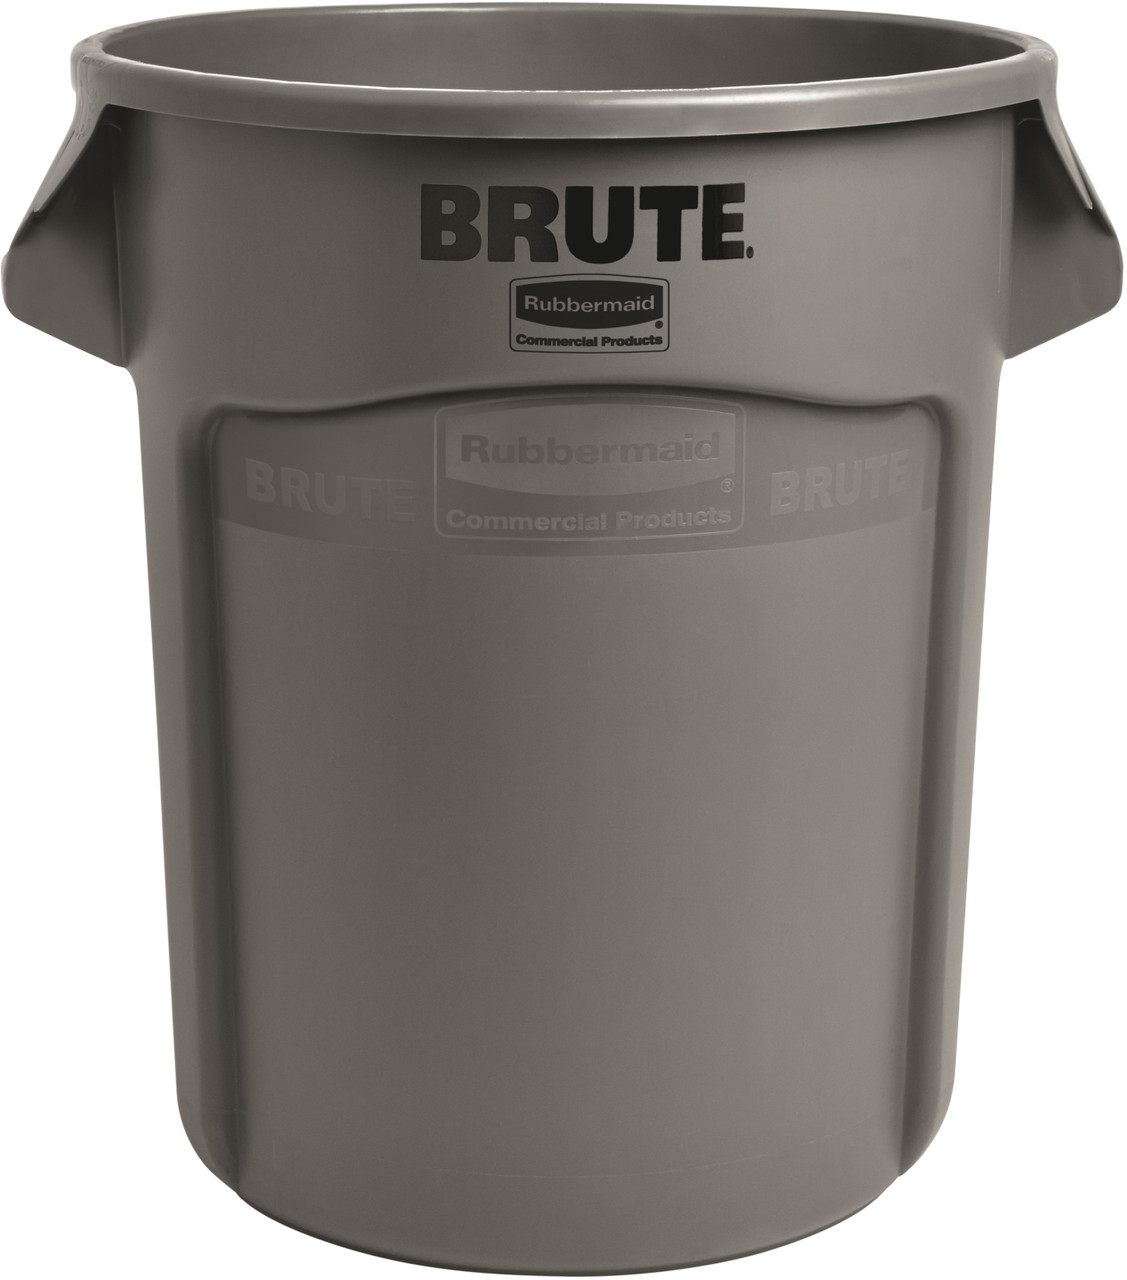 FG262000GRAY - Rubbermaid Brute Container - 75.7 Ltr - Grey